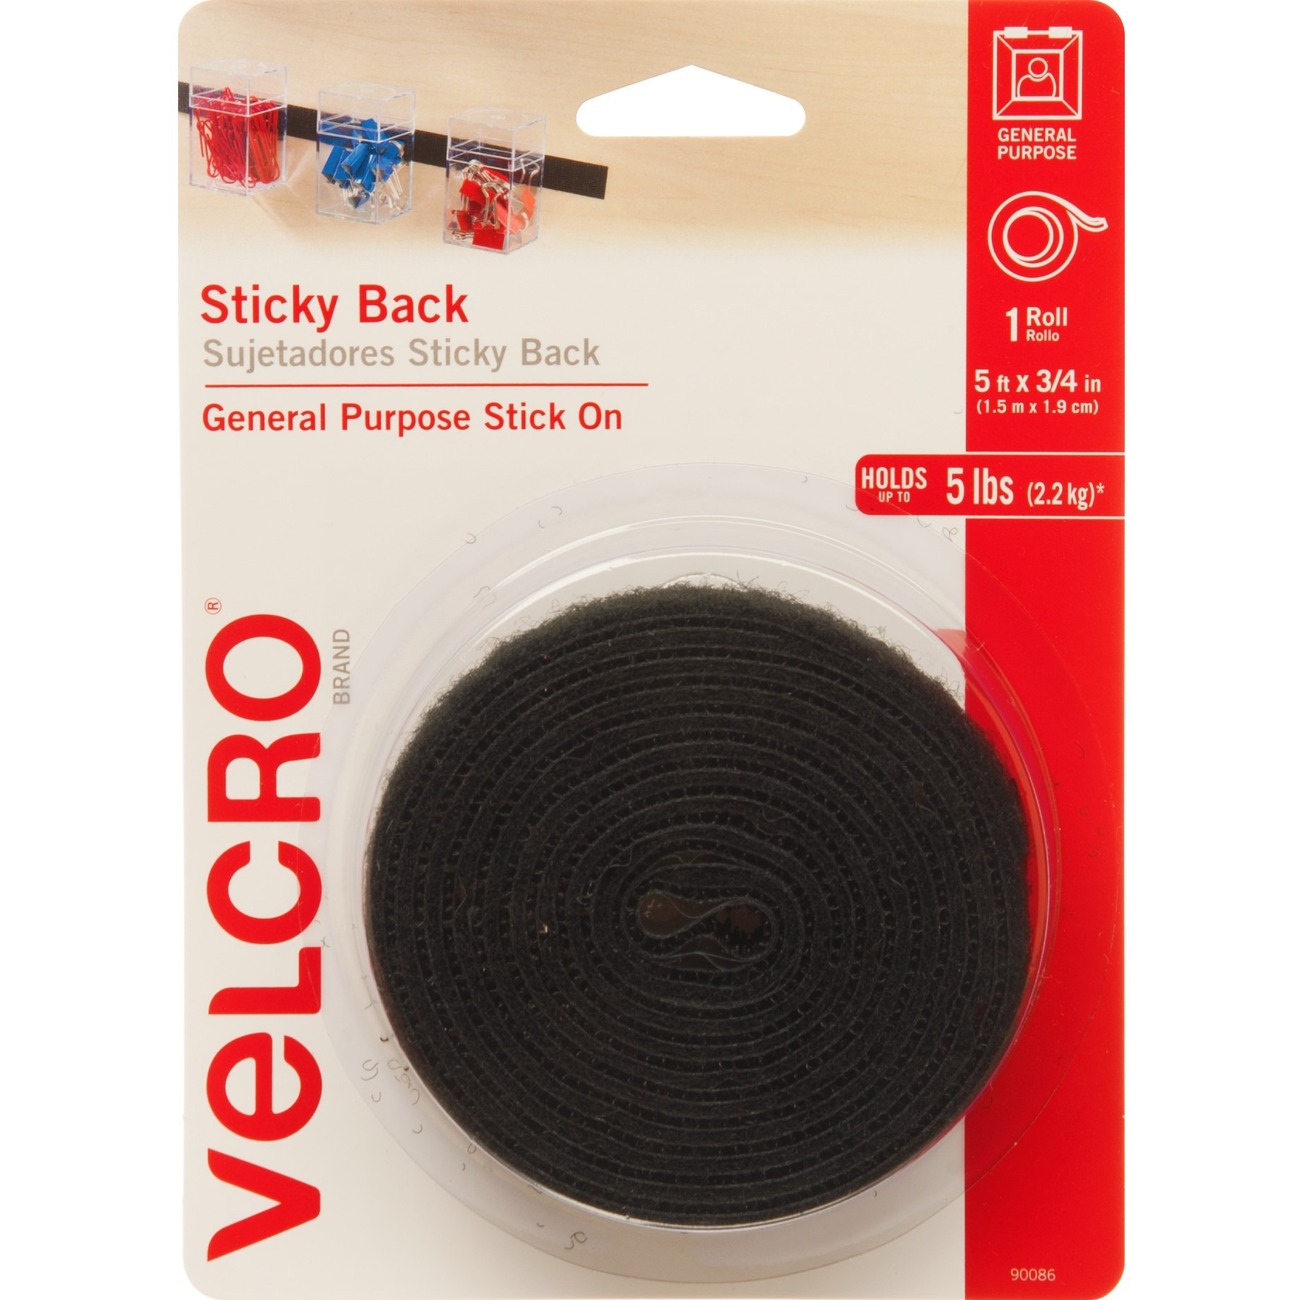 Velcro® Sticky Back Hook and Loop Fastener - White, 18 x 0.75 in